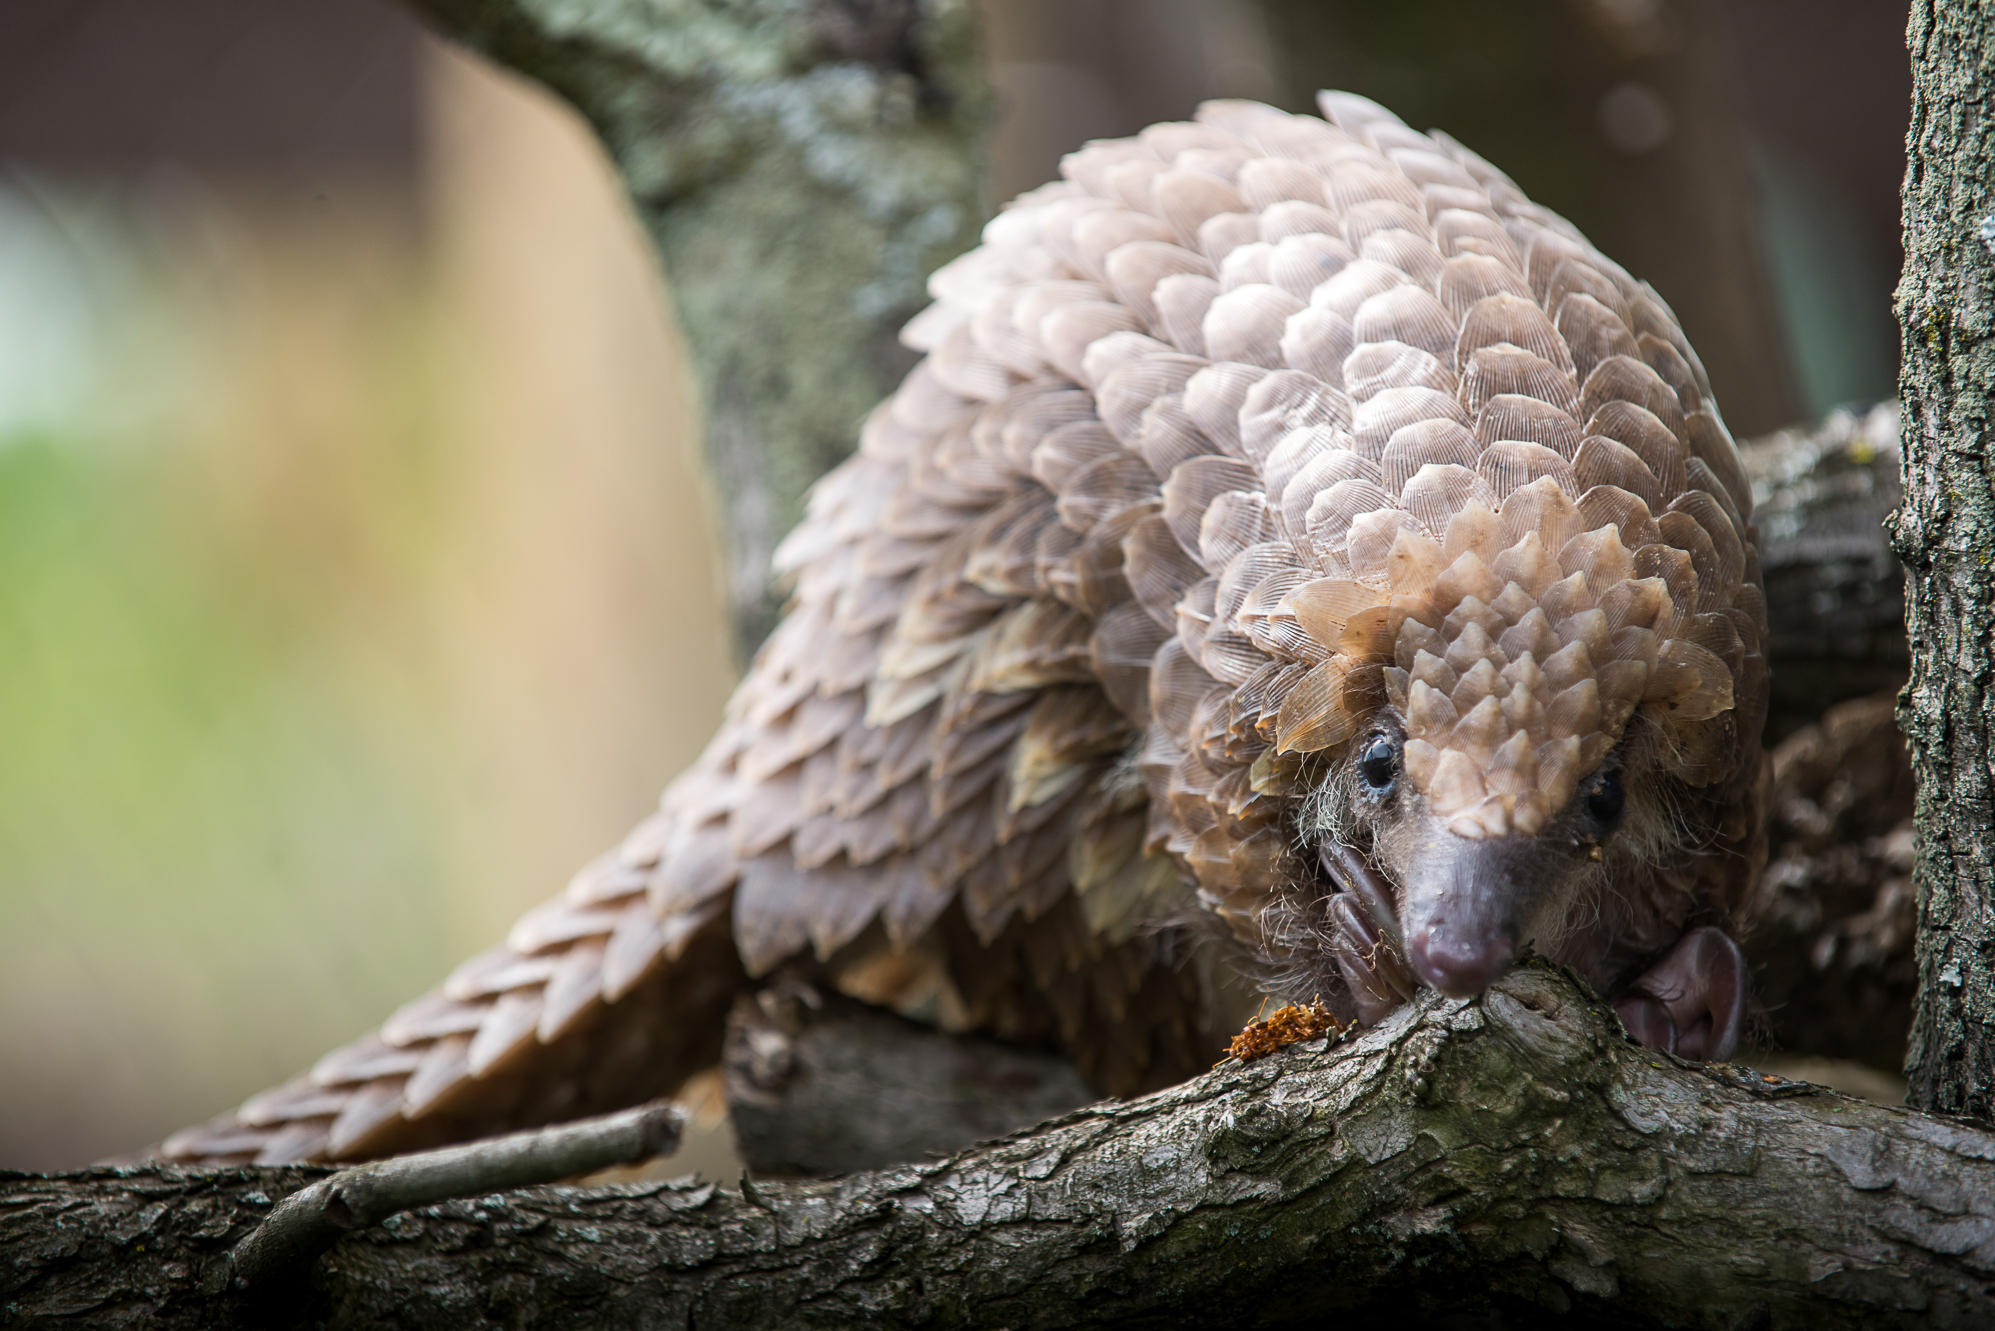 Conservationists Divided Over How To Save The Pangolin, The World's Most Trafficked ...